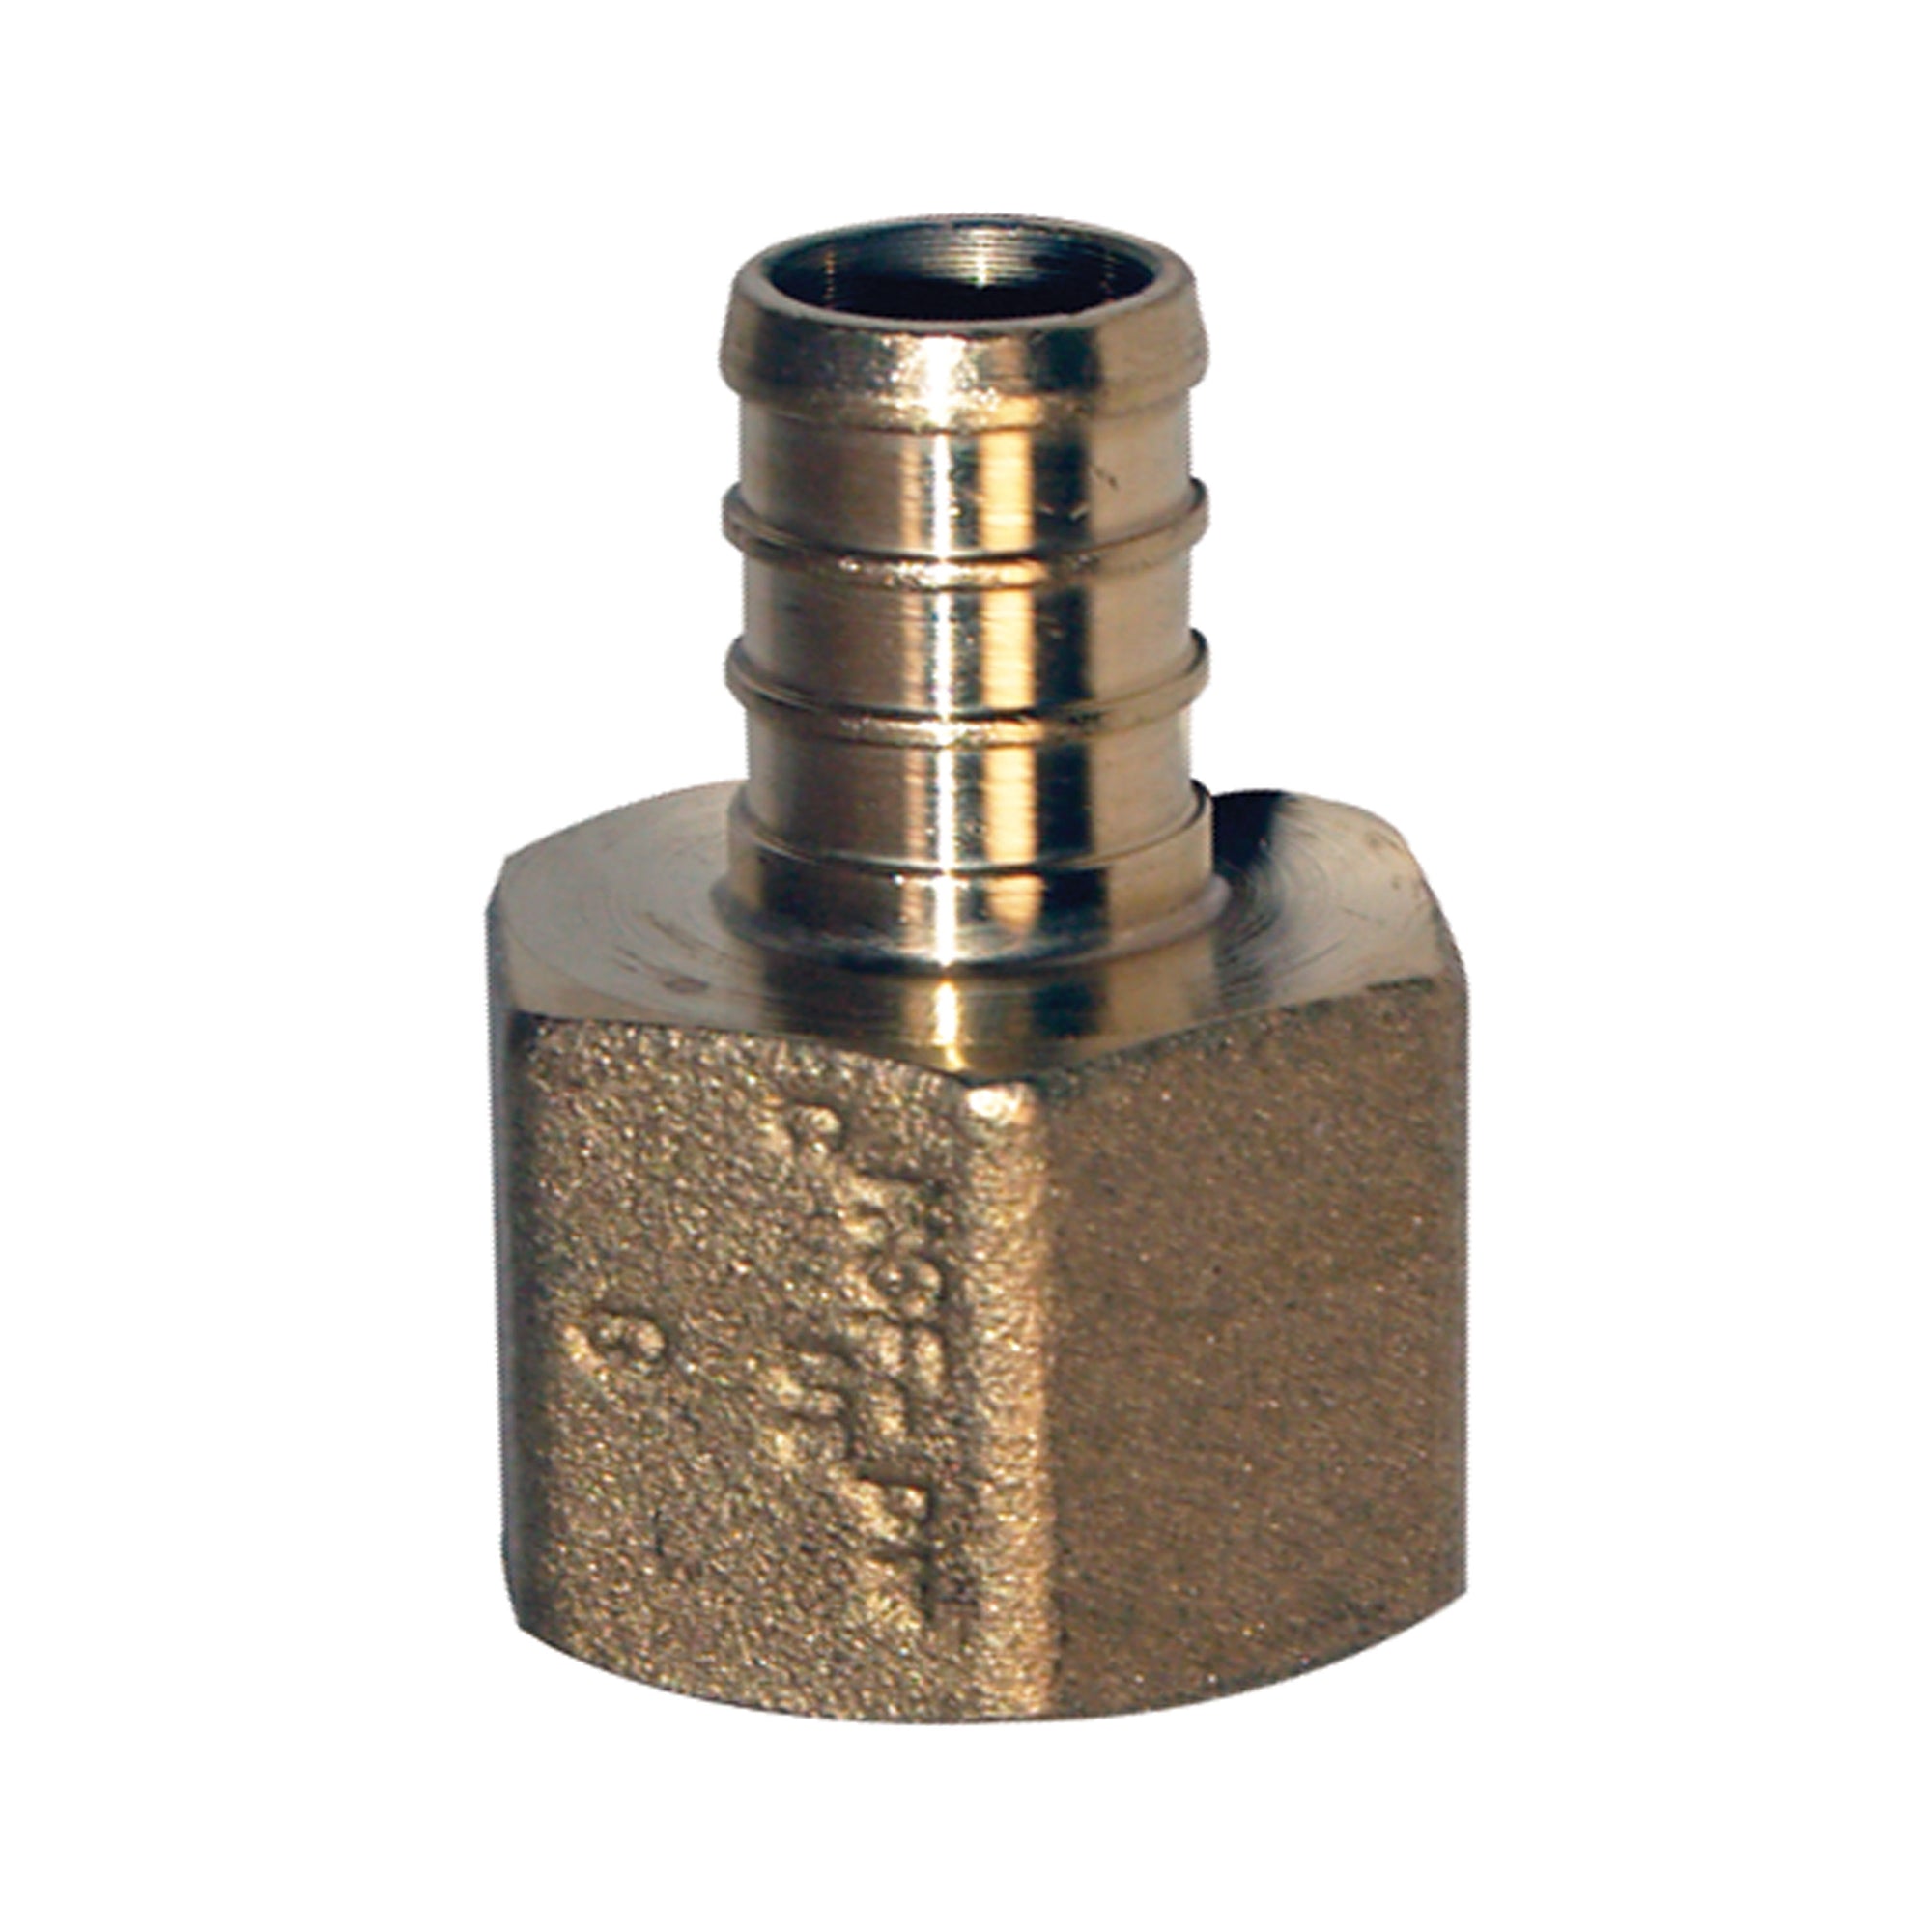 Flair-It 51128 BestPEX Brass Female Adapter - 1/2" x 1/2" FPT